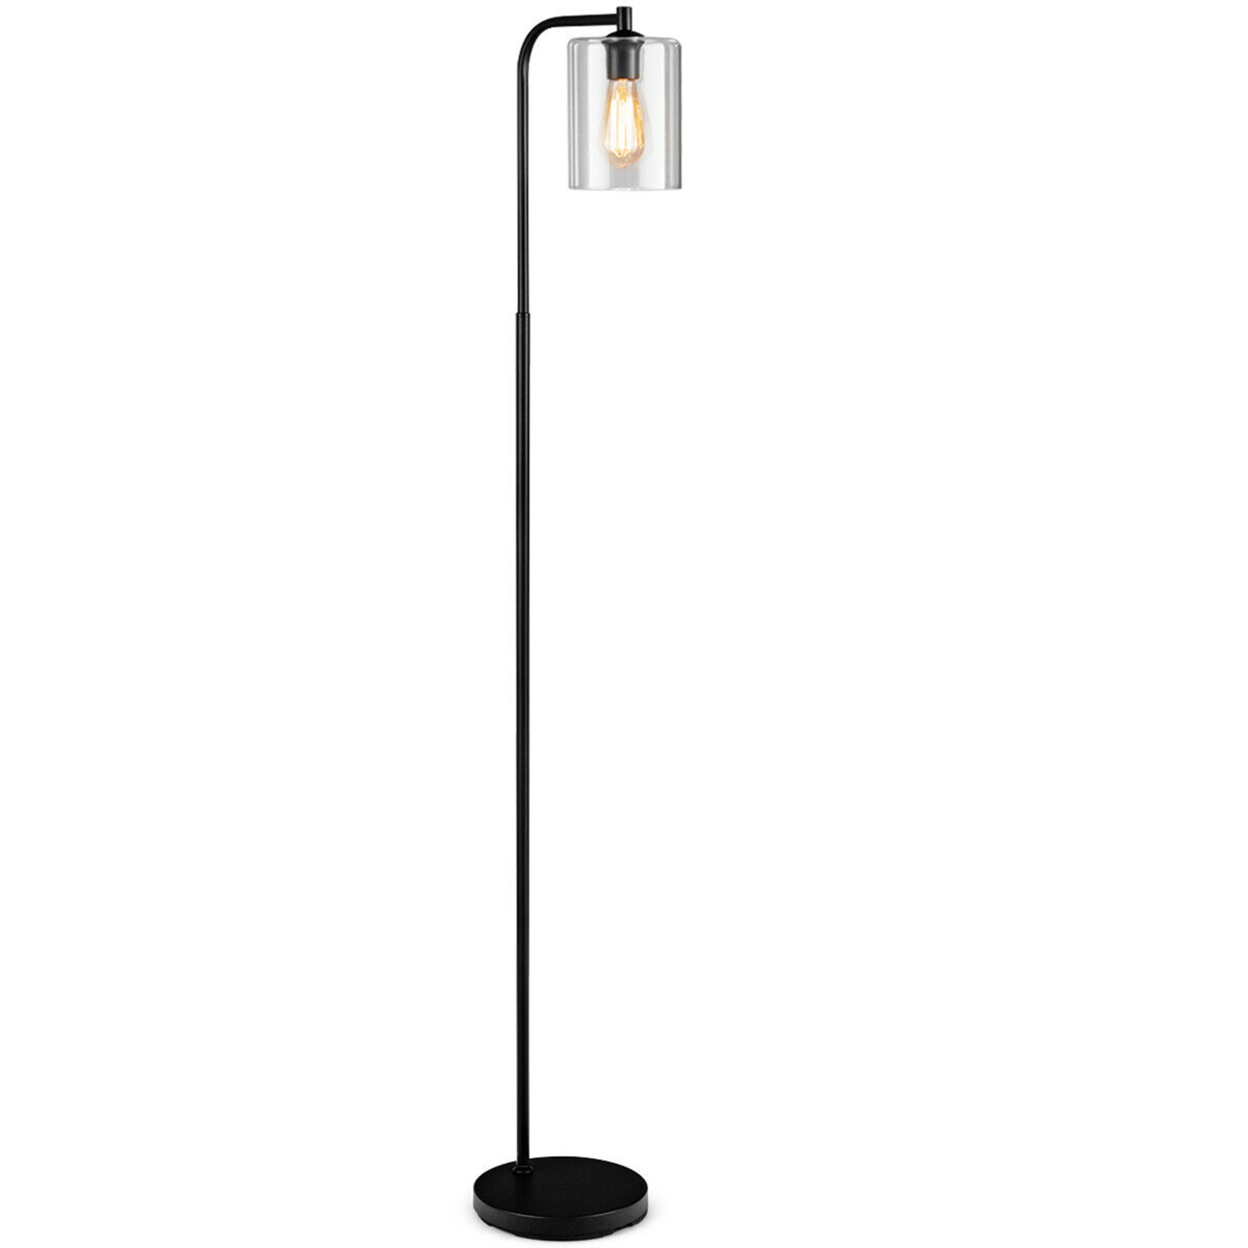 Industrial Floor Lamp W/ Glass Shade Indoor Modern Tall Pole Lamp For Office